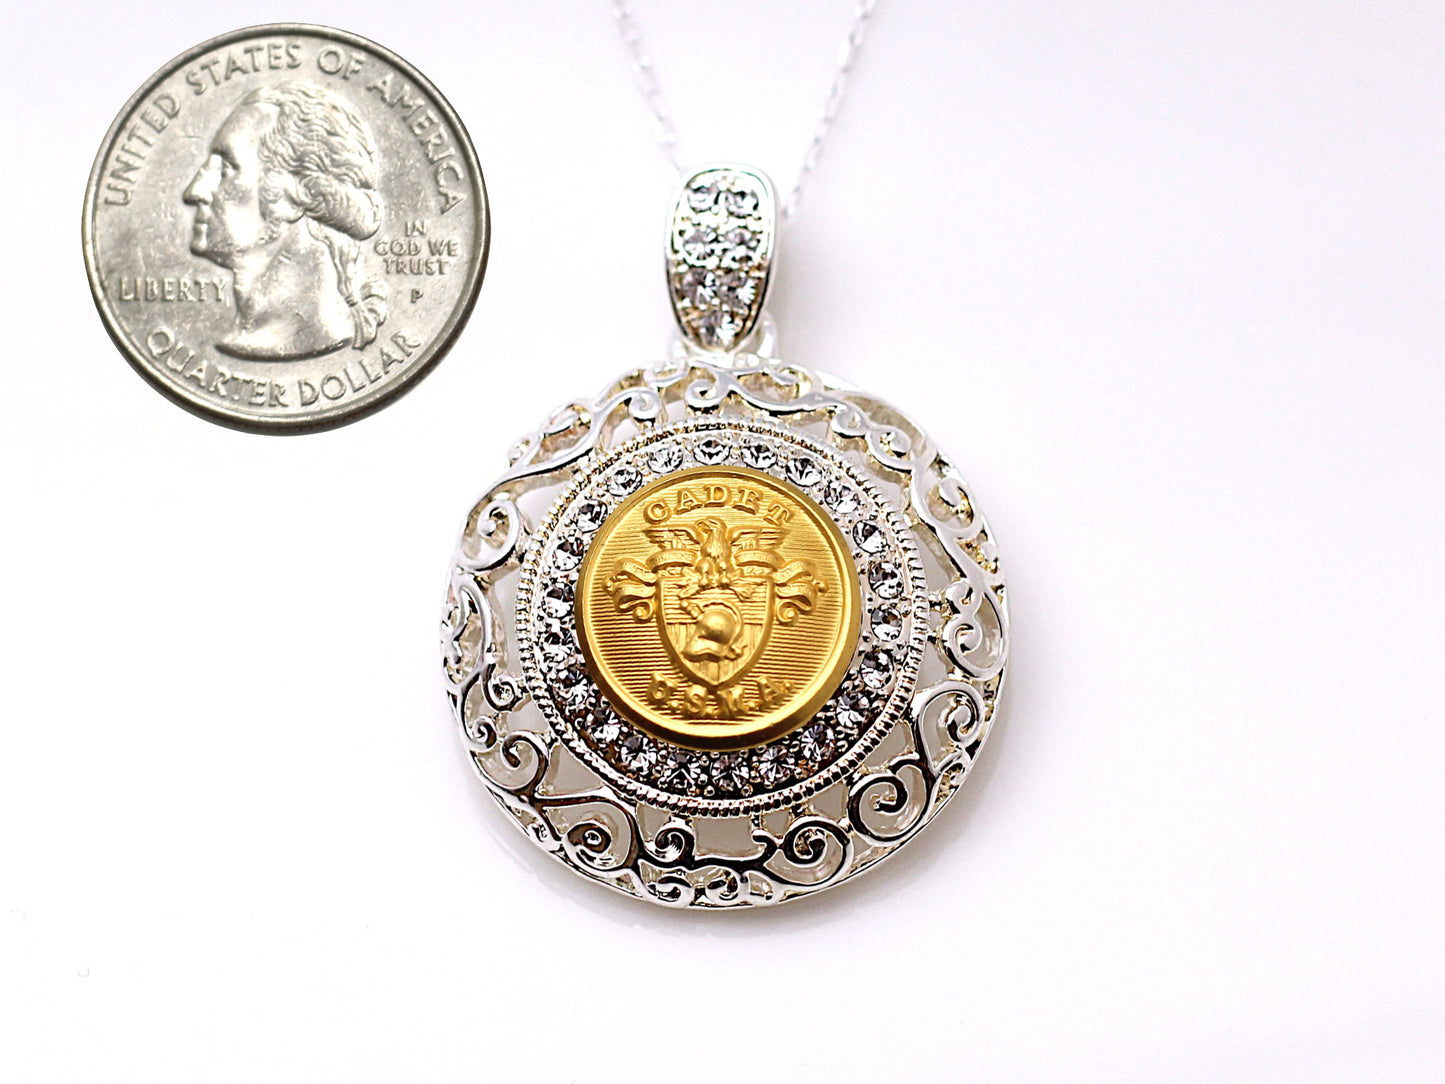 U.S. Military Academy Button Necklace - Large Silver Rhinestone Pendant